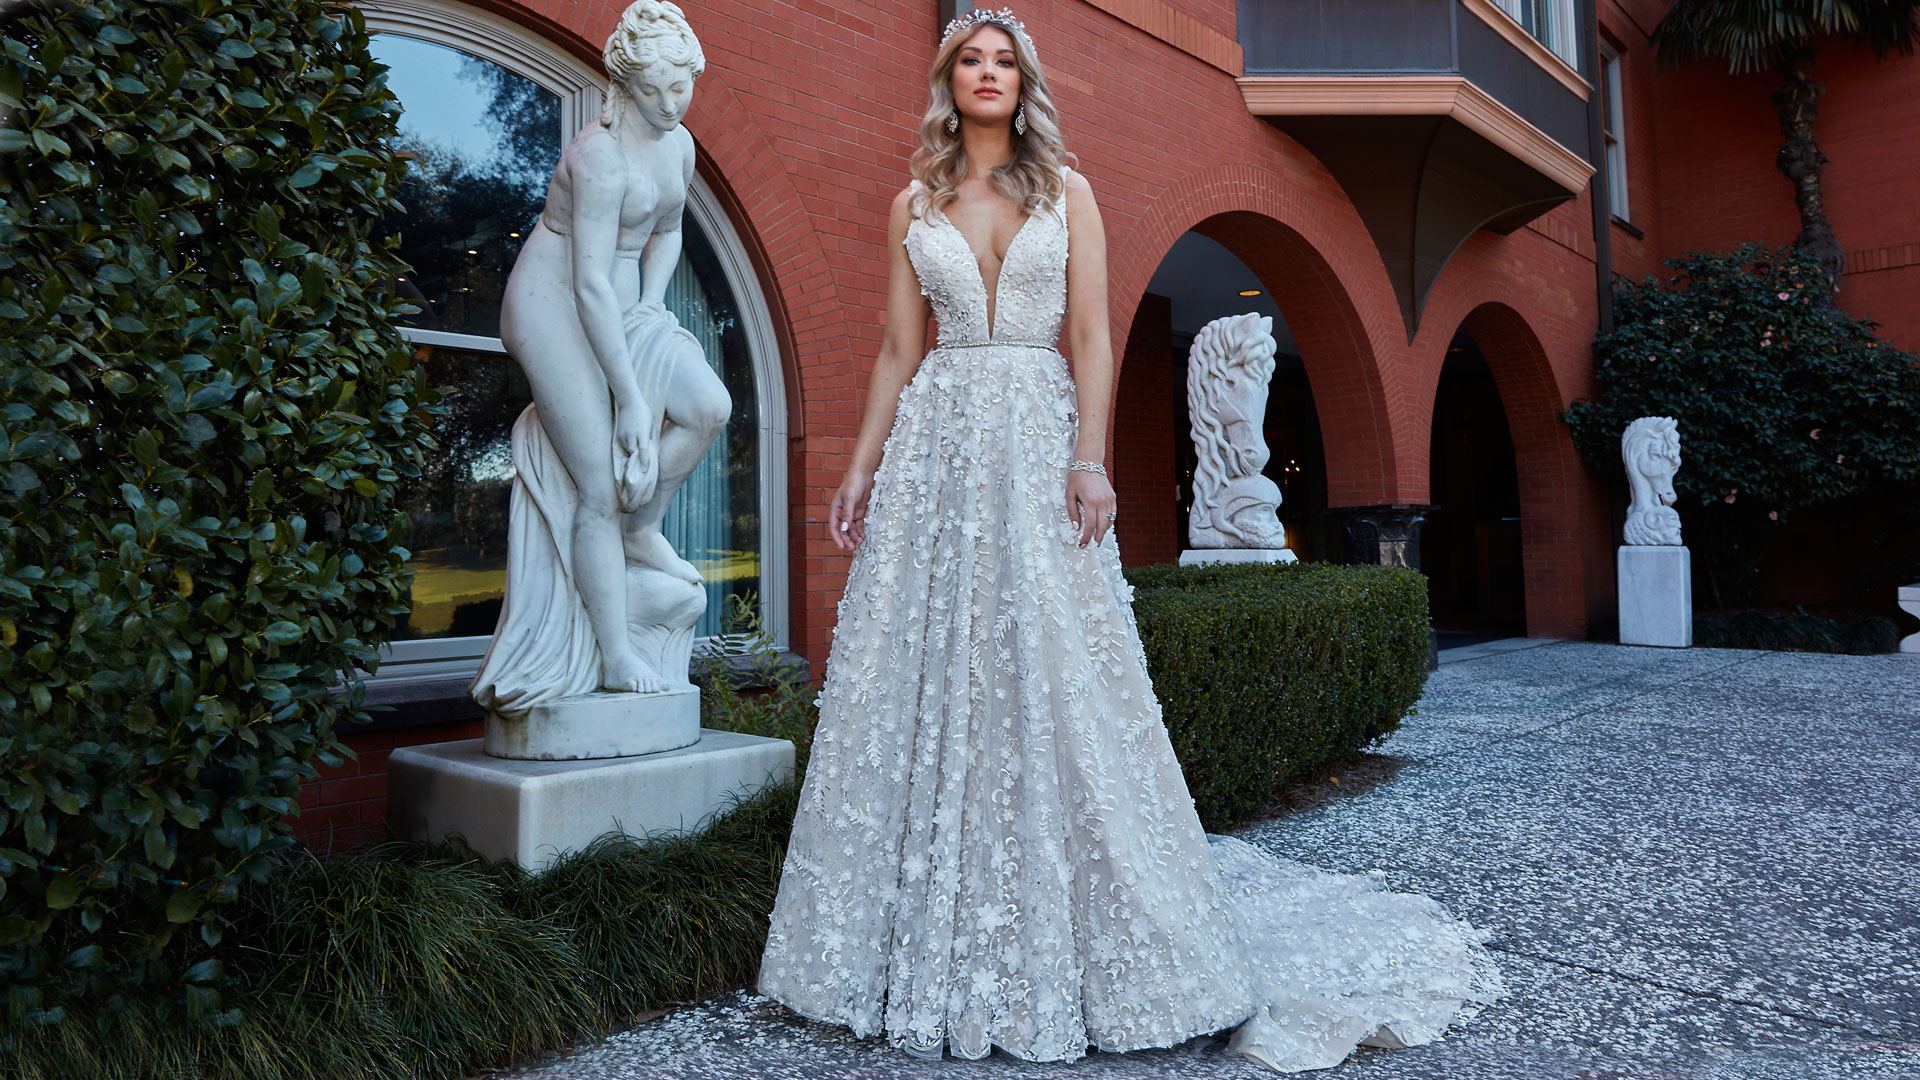 Designers from Down Under – Pallas Couture Arrives in Chicago! The American bridal